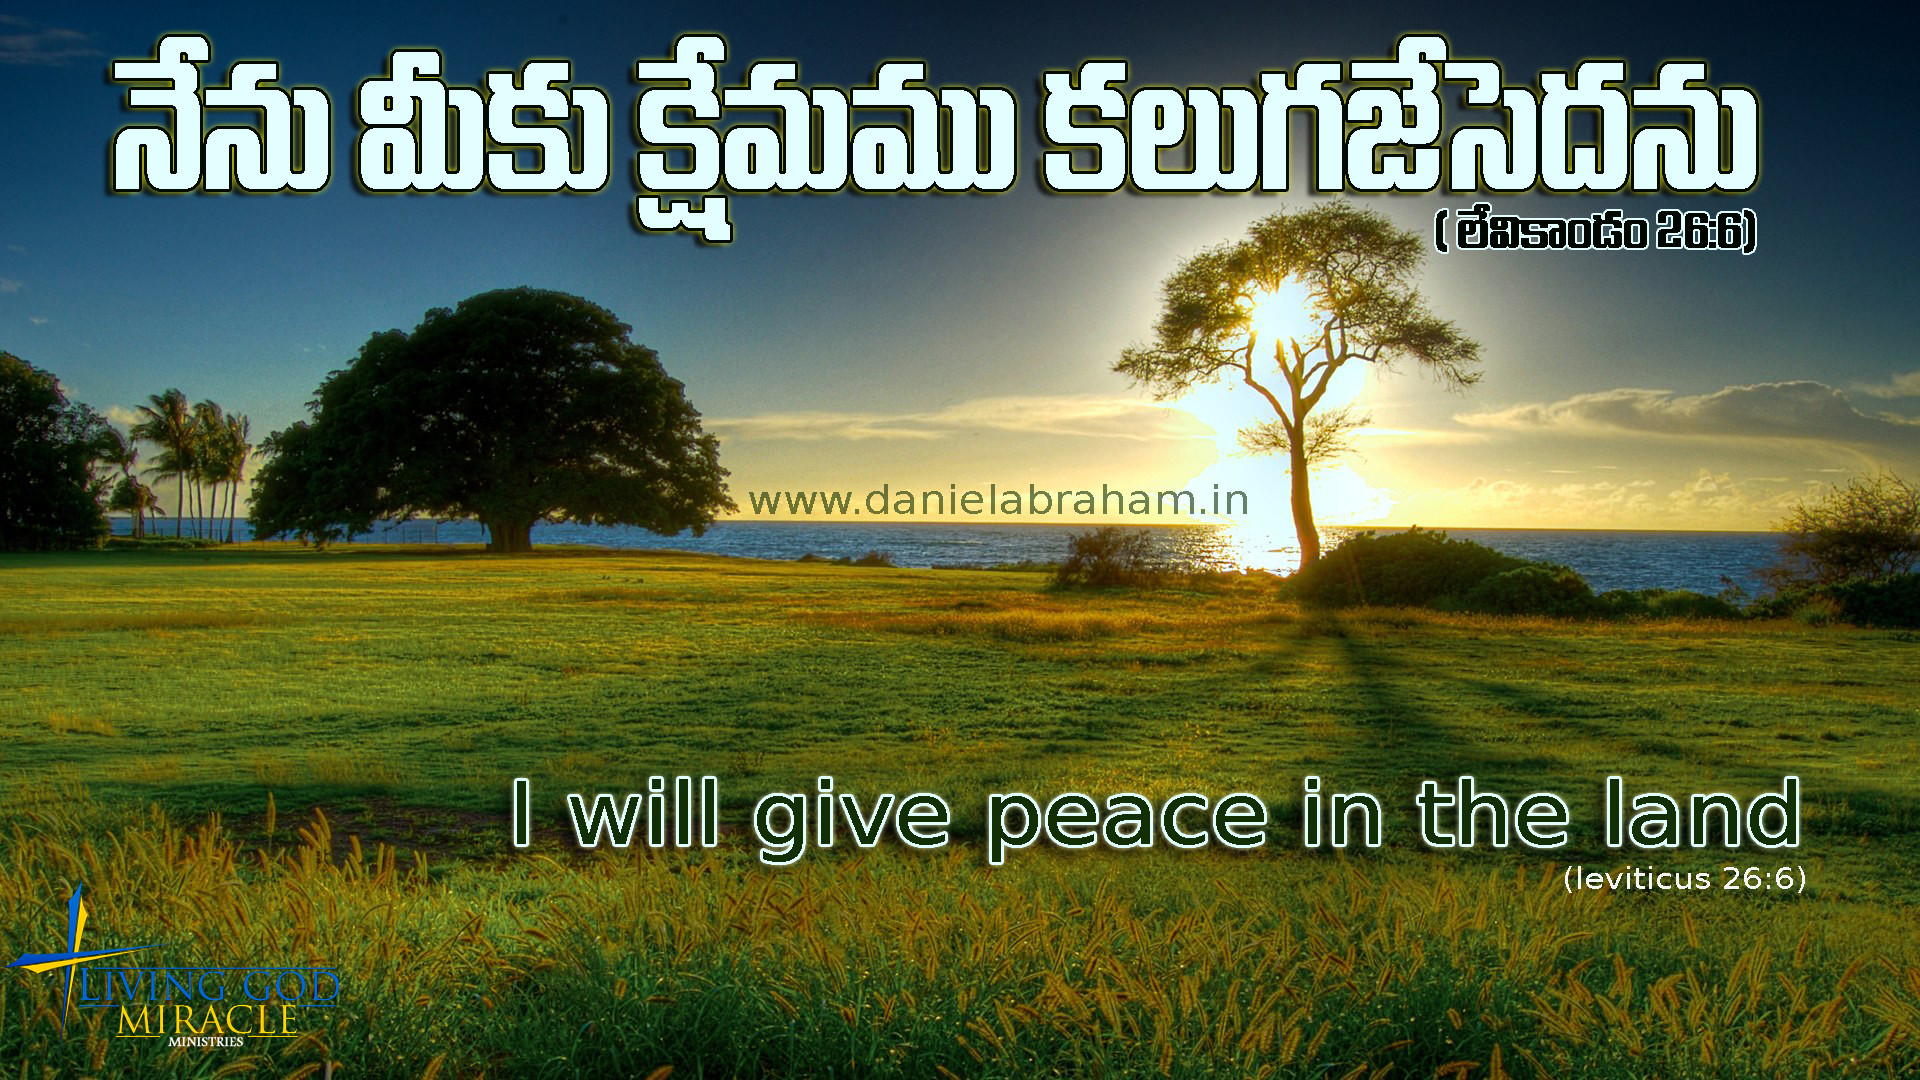 1920x1080 Christian Wallpapers With Bible Verses For Mobile In Telugu Living god .